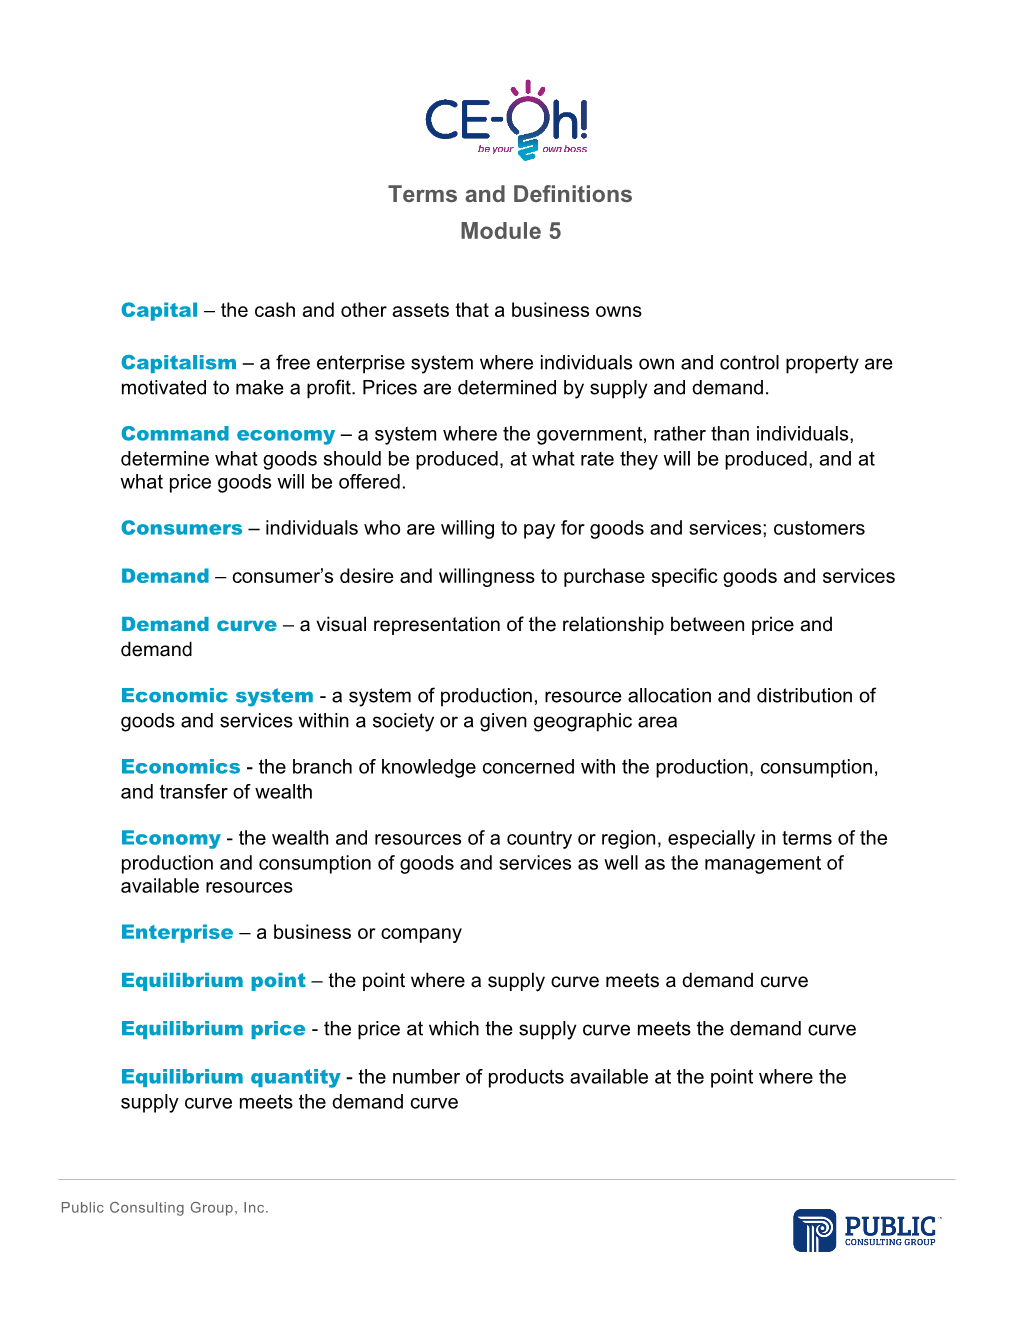 Module 05 – Terms and Definitions